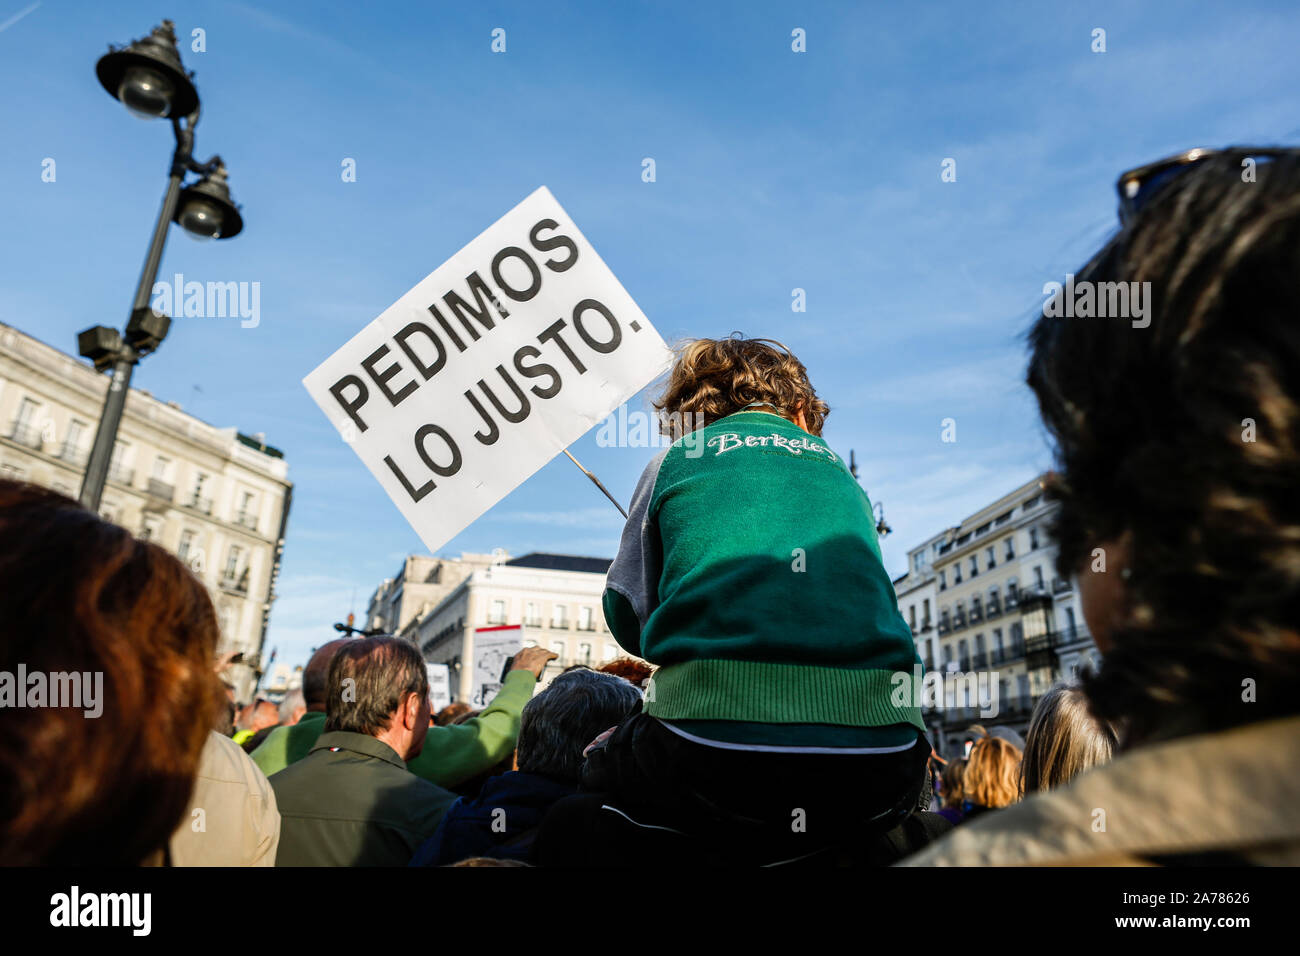 A child holding a placard during the demonstration. Thousands of people gathered at Puerta del Sol to protest against precariousness and low pensions for elder people. Marches from Bilbao (northern Spain) and Rota (southern Spain) met at the country's capital to protest in front of Spanish Parliament. Stock Photo